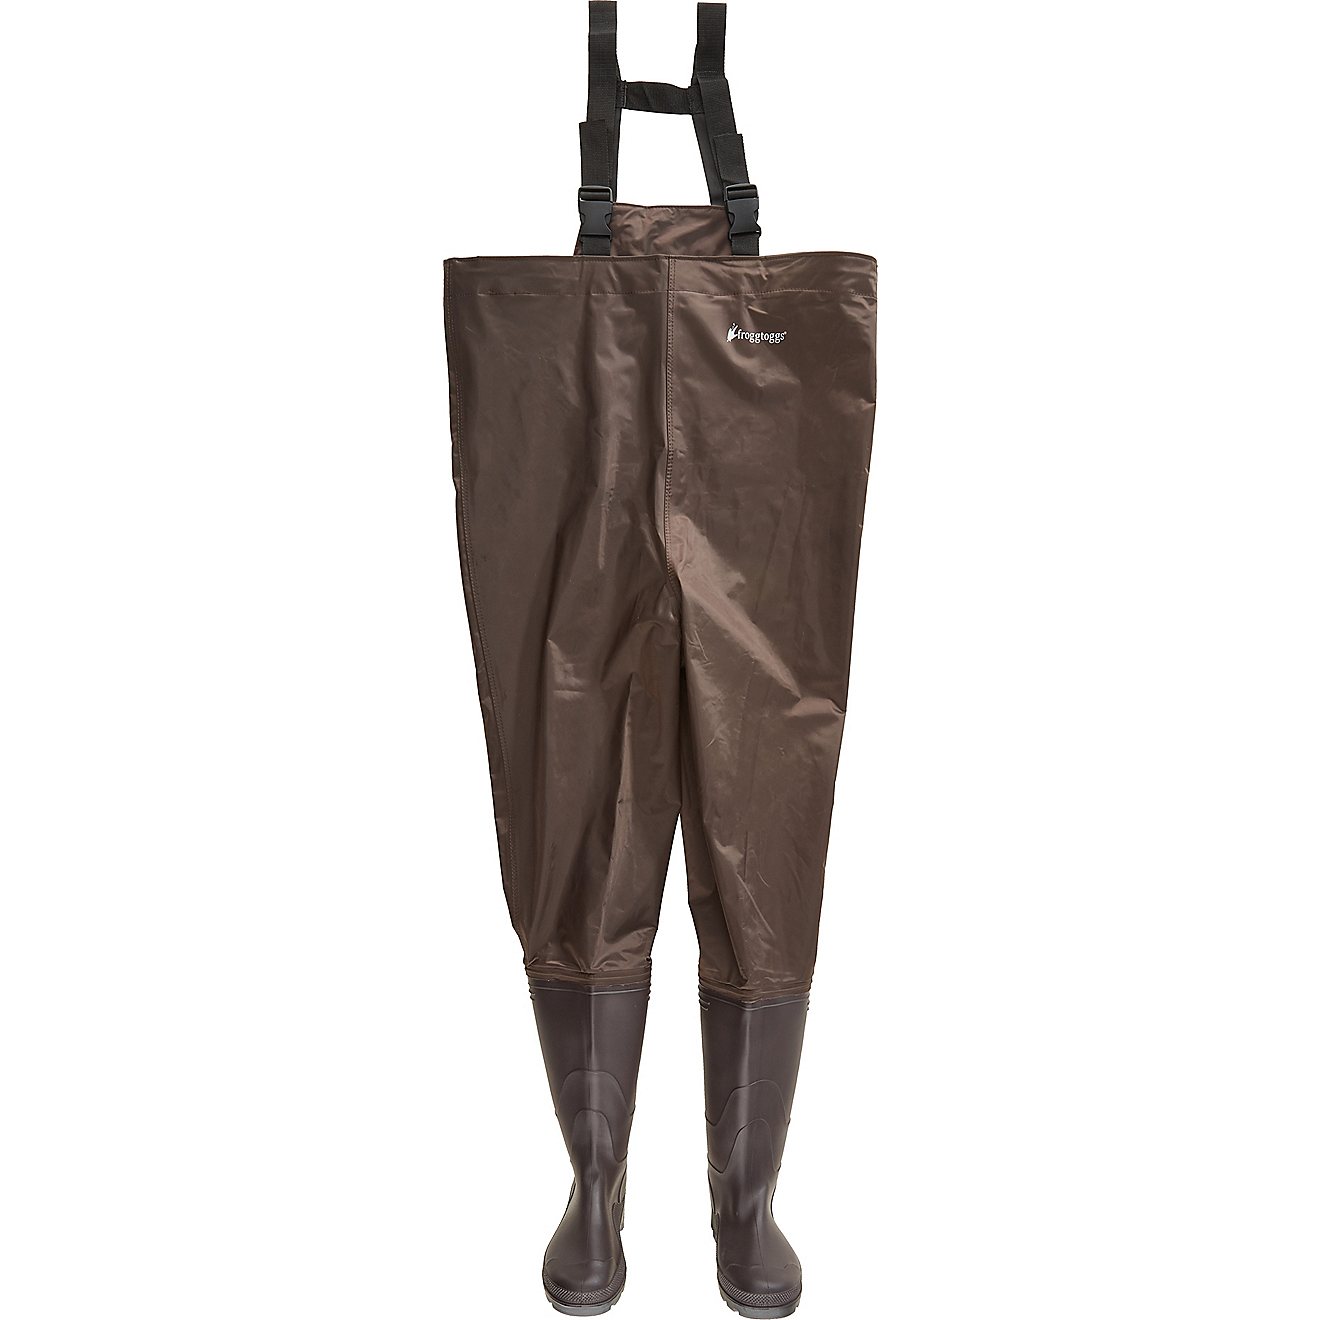 frogg toggs Men's Rana II PVC Chest Wader                                                                                        - view number 4